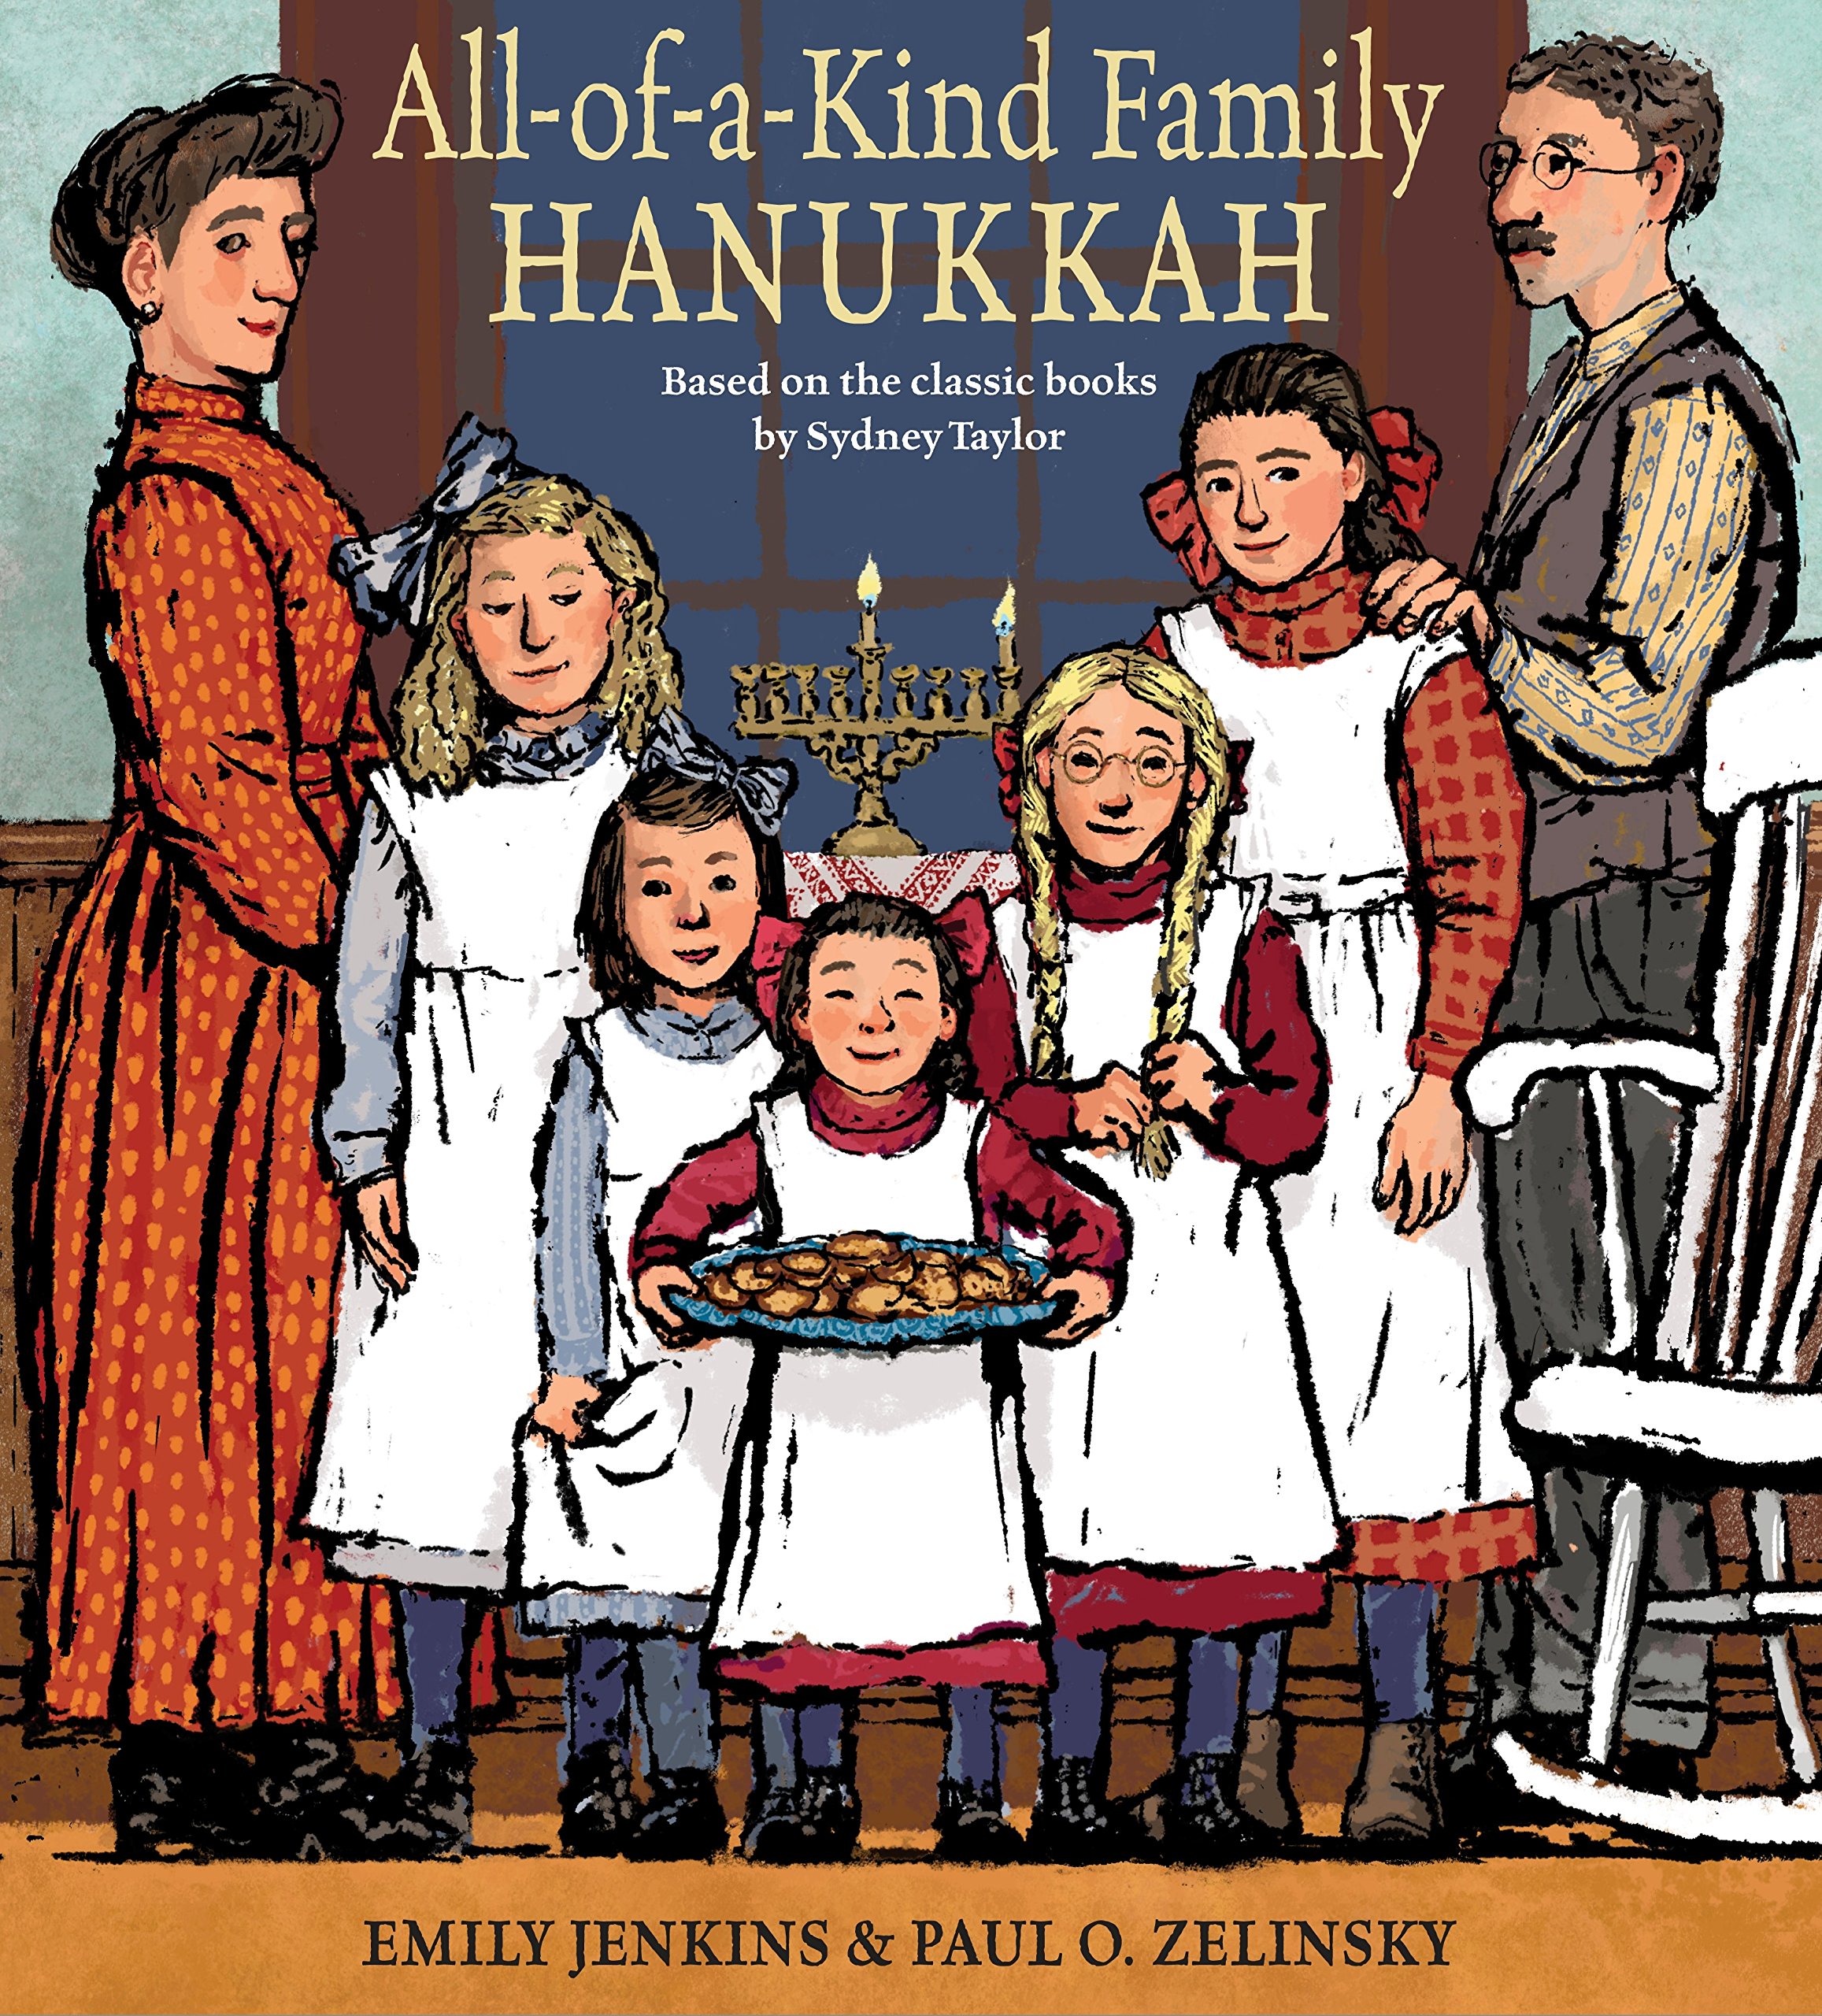 All of a Kind Family Hanukkah book cover